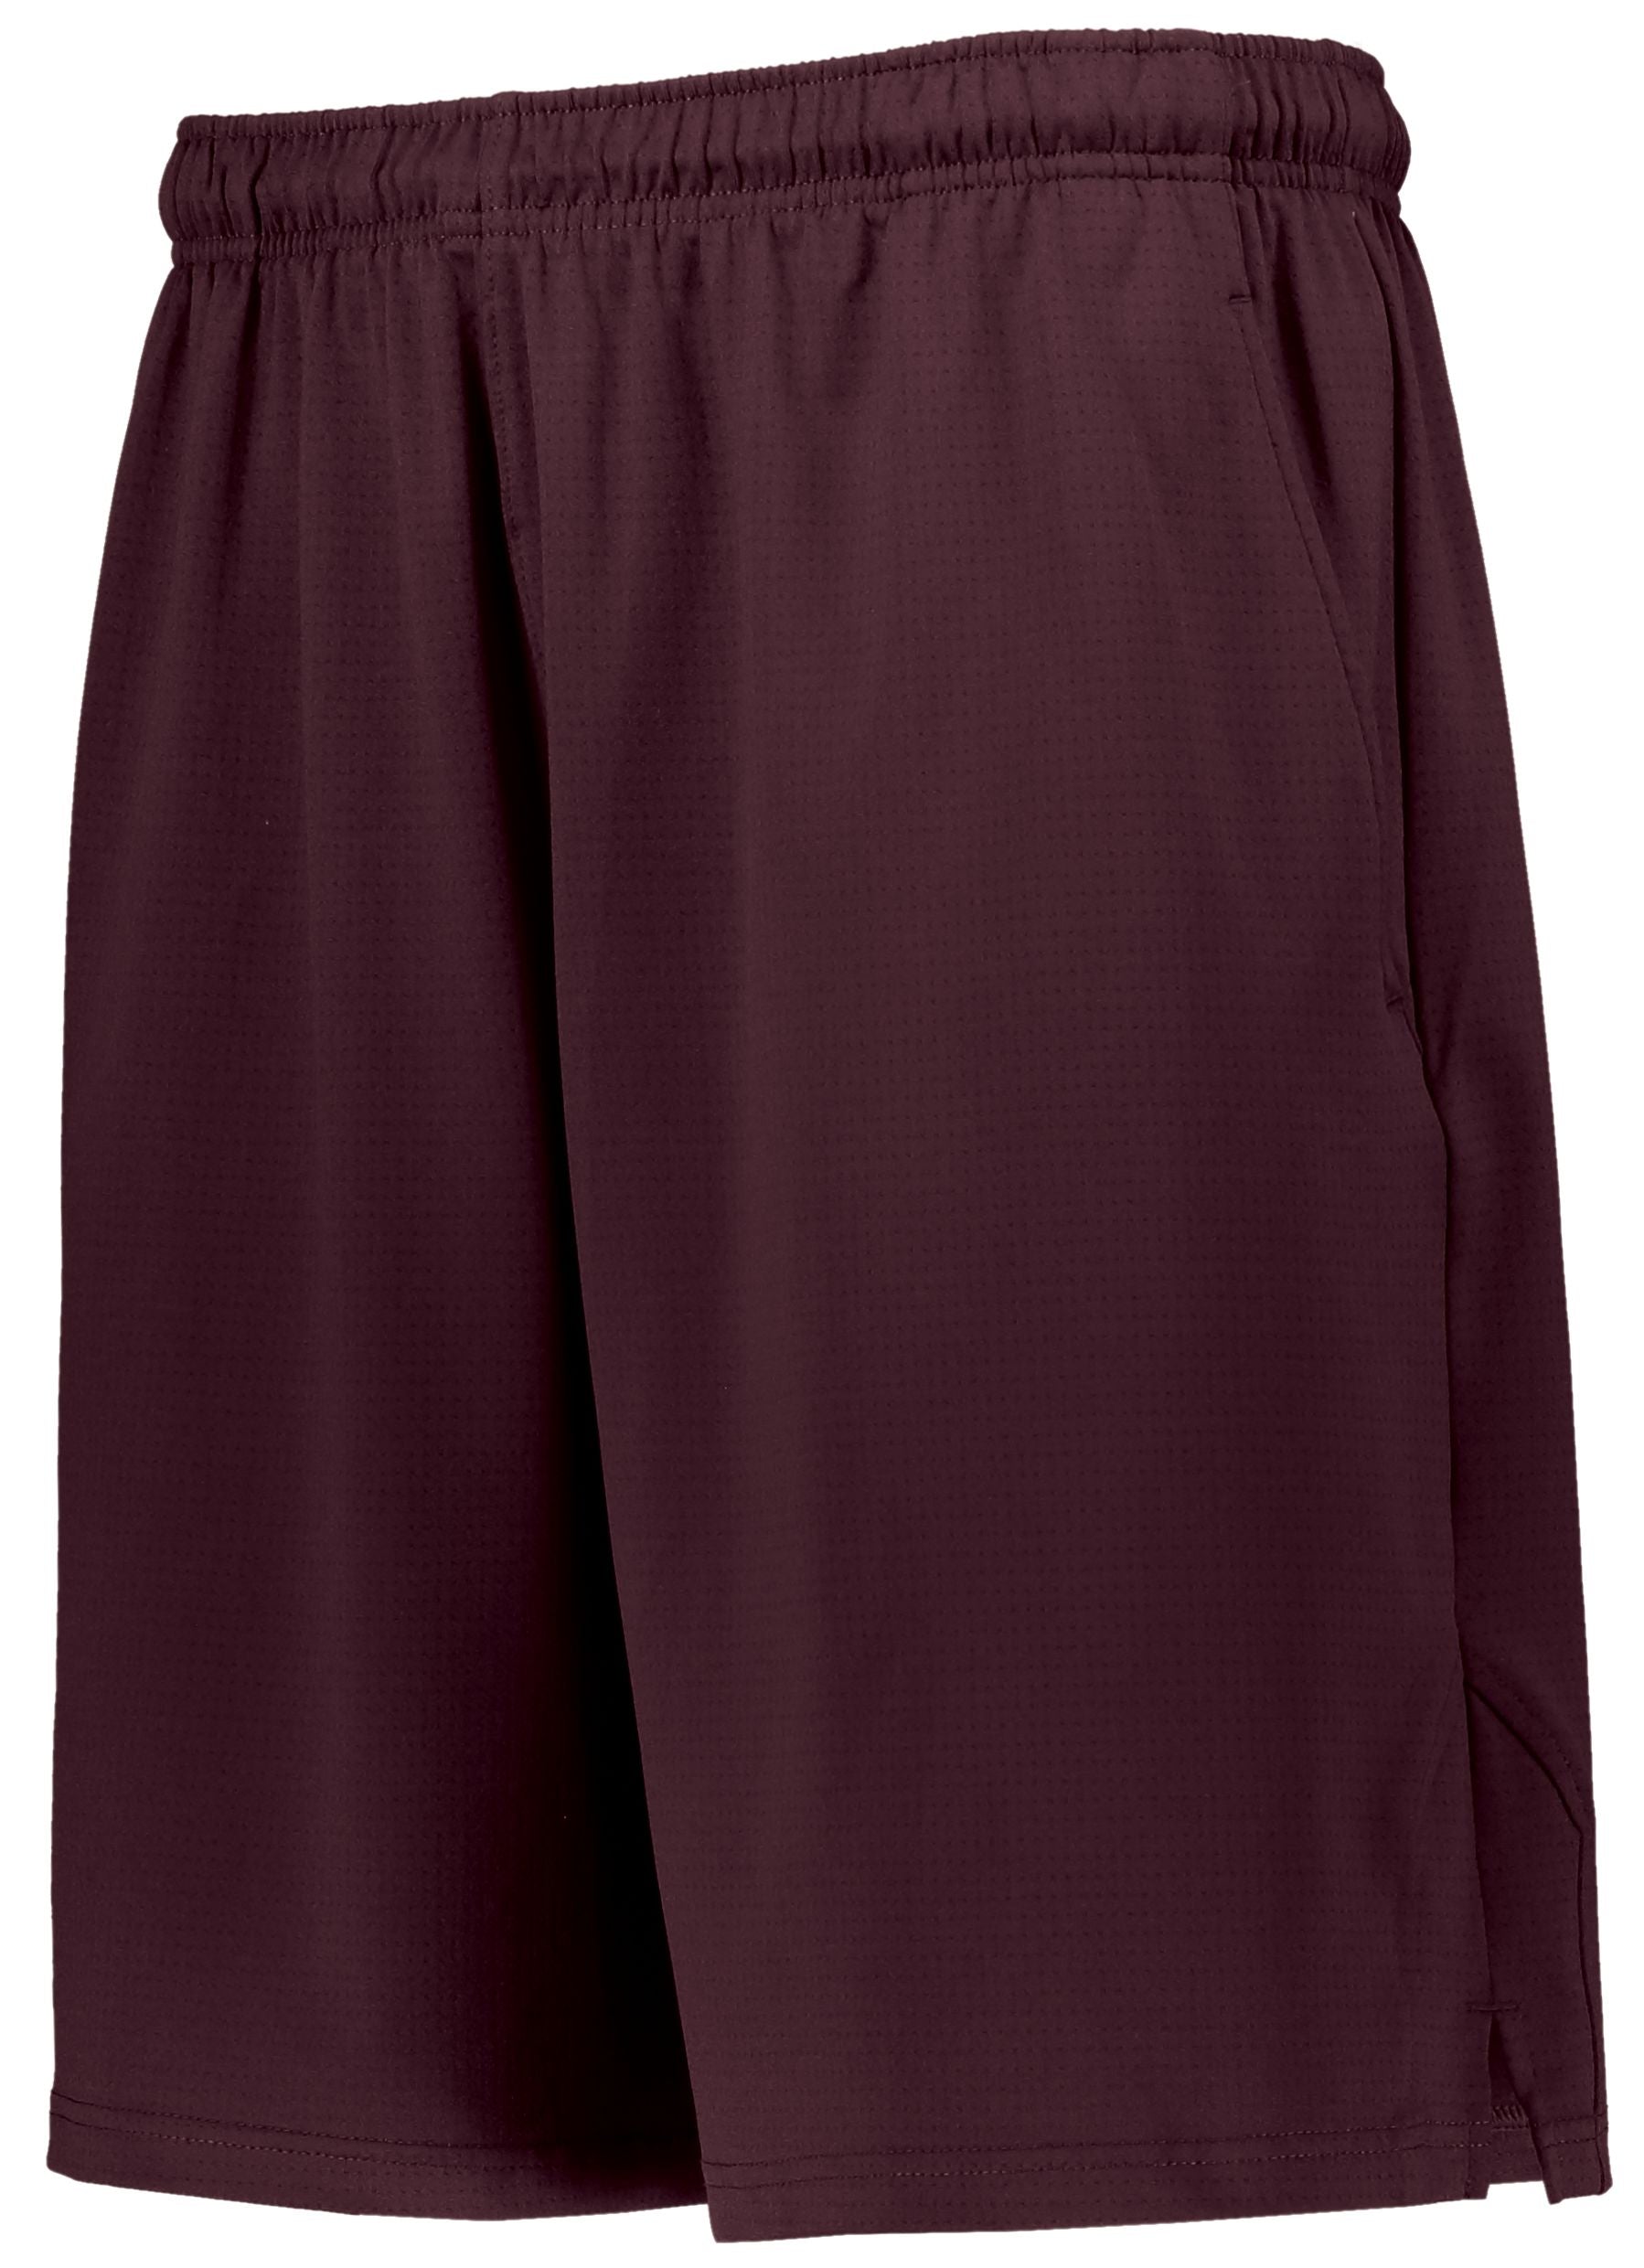 Russell Athletic Team Driven Coaches Shorts in Maroon  -Part of the Adult, Adult-Shorts, Russell-Athletic-Products product lines at KanaleyCreations.com